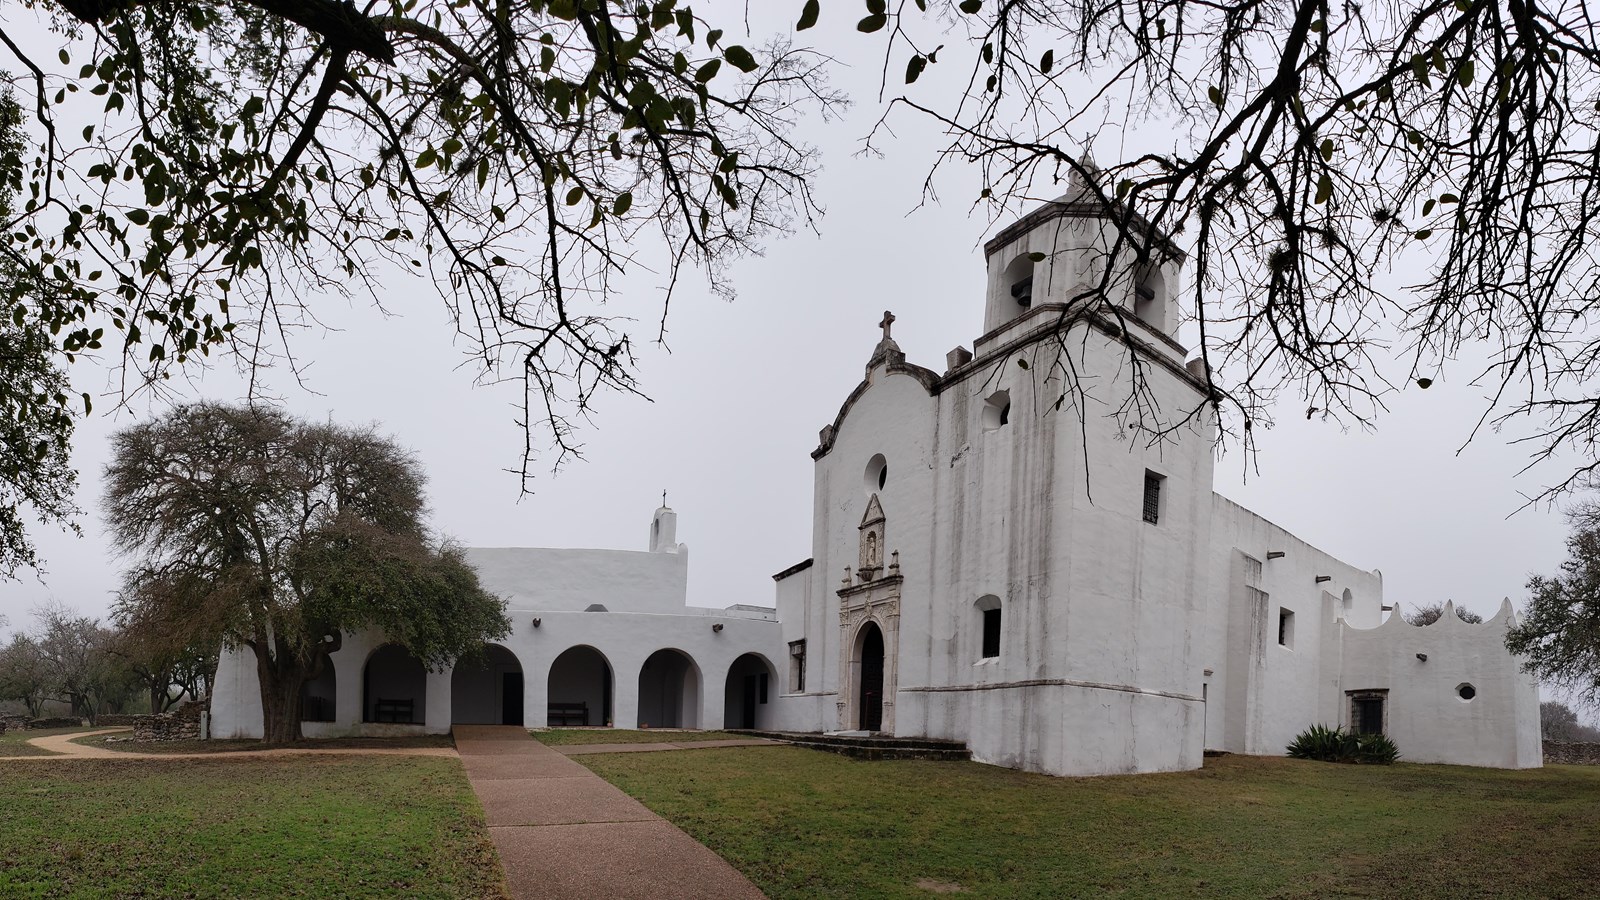 Large white church with connected historical structures.